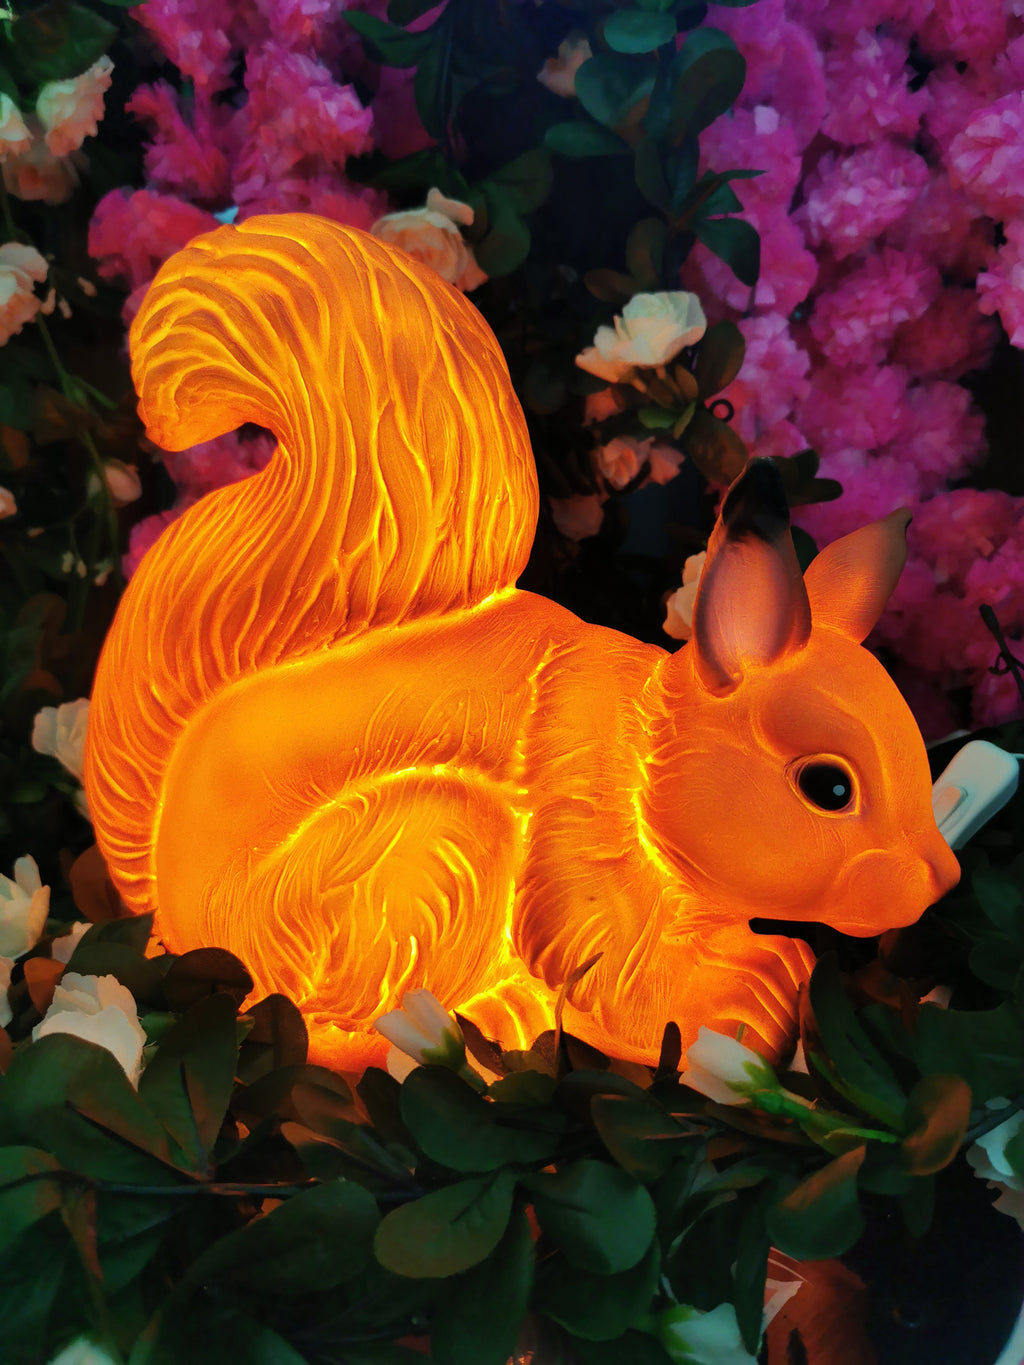 Sweet squirrel lights for a bit of forest fairytale folklore magic to your home🍄.Kids love them for a nightlight too. 

Made in Germany. 

Led light UK plug. 

25cm long, 25cm high, 16cm wide

 

